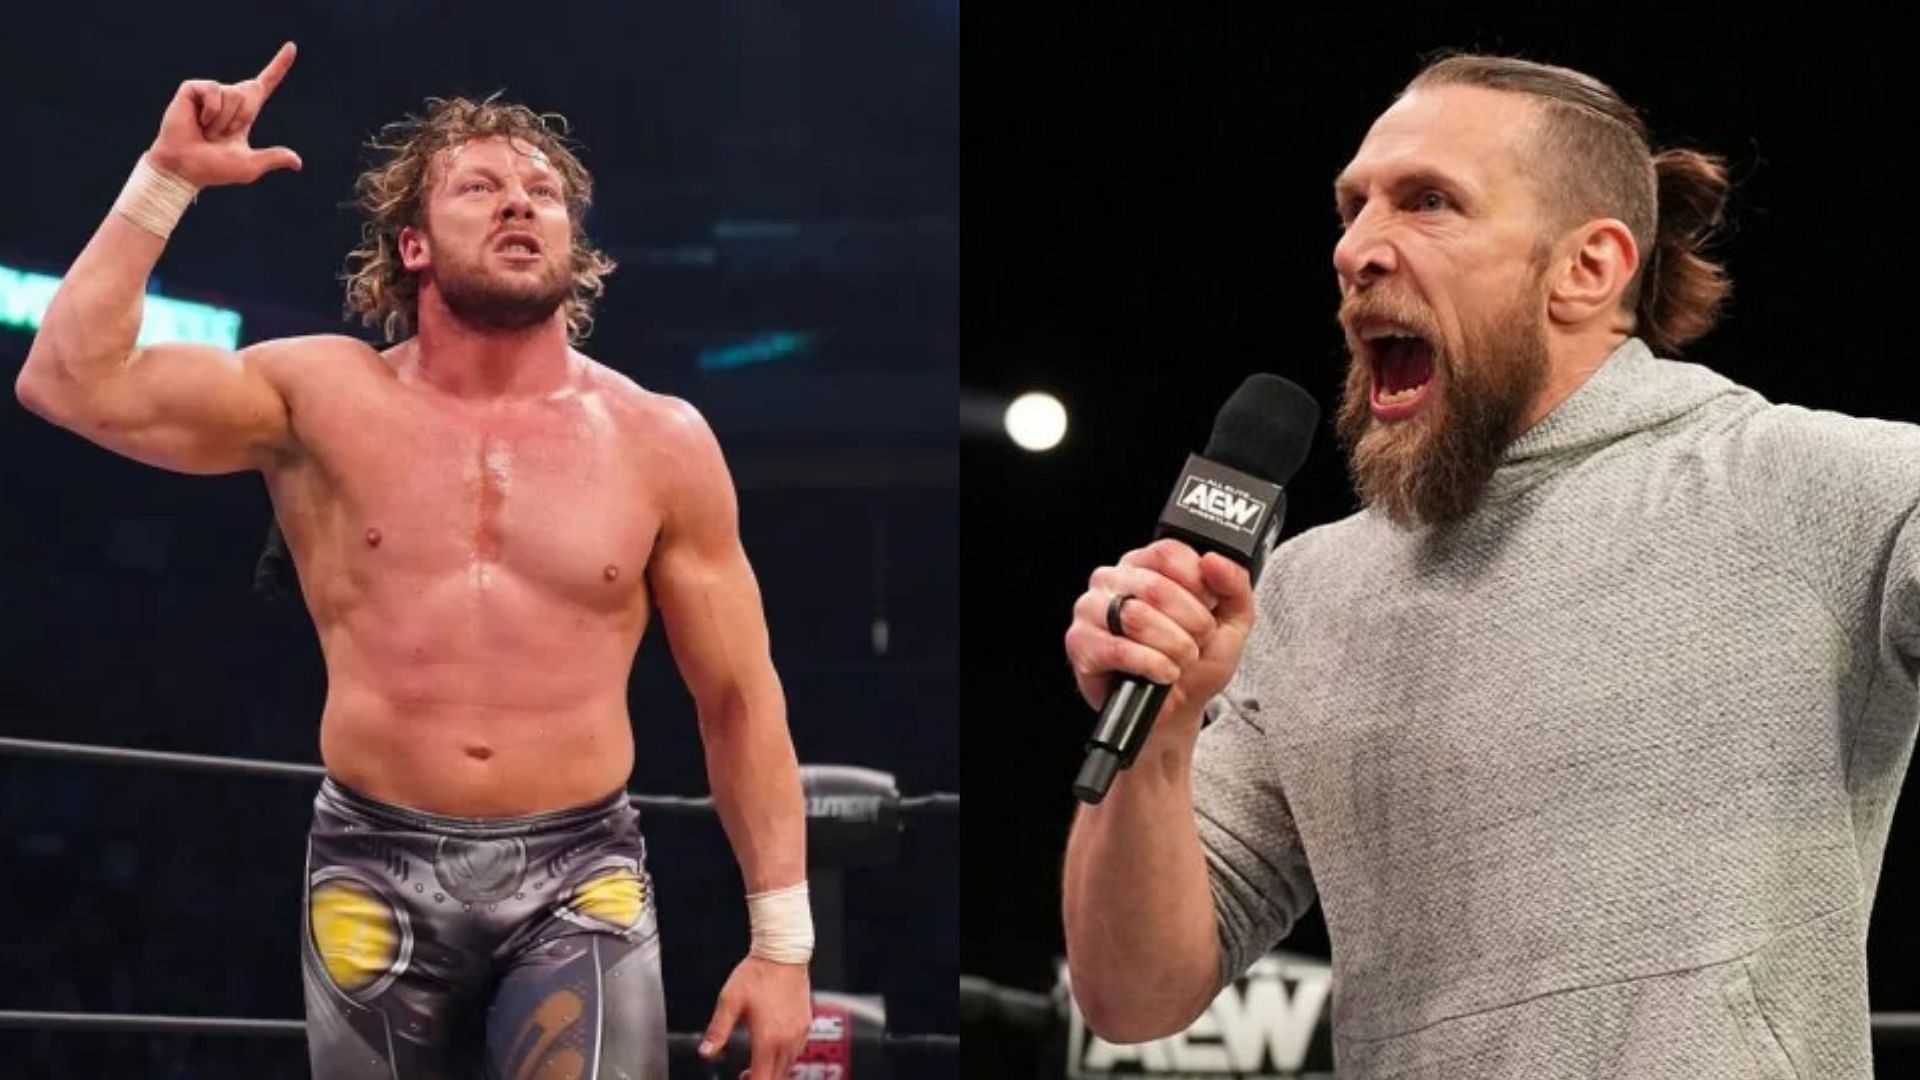 Kenny Omega and Bryan Danielson are widely regarded as two of the finest wrestlers in the world